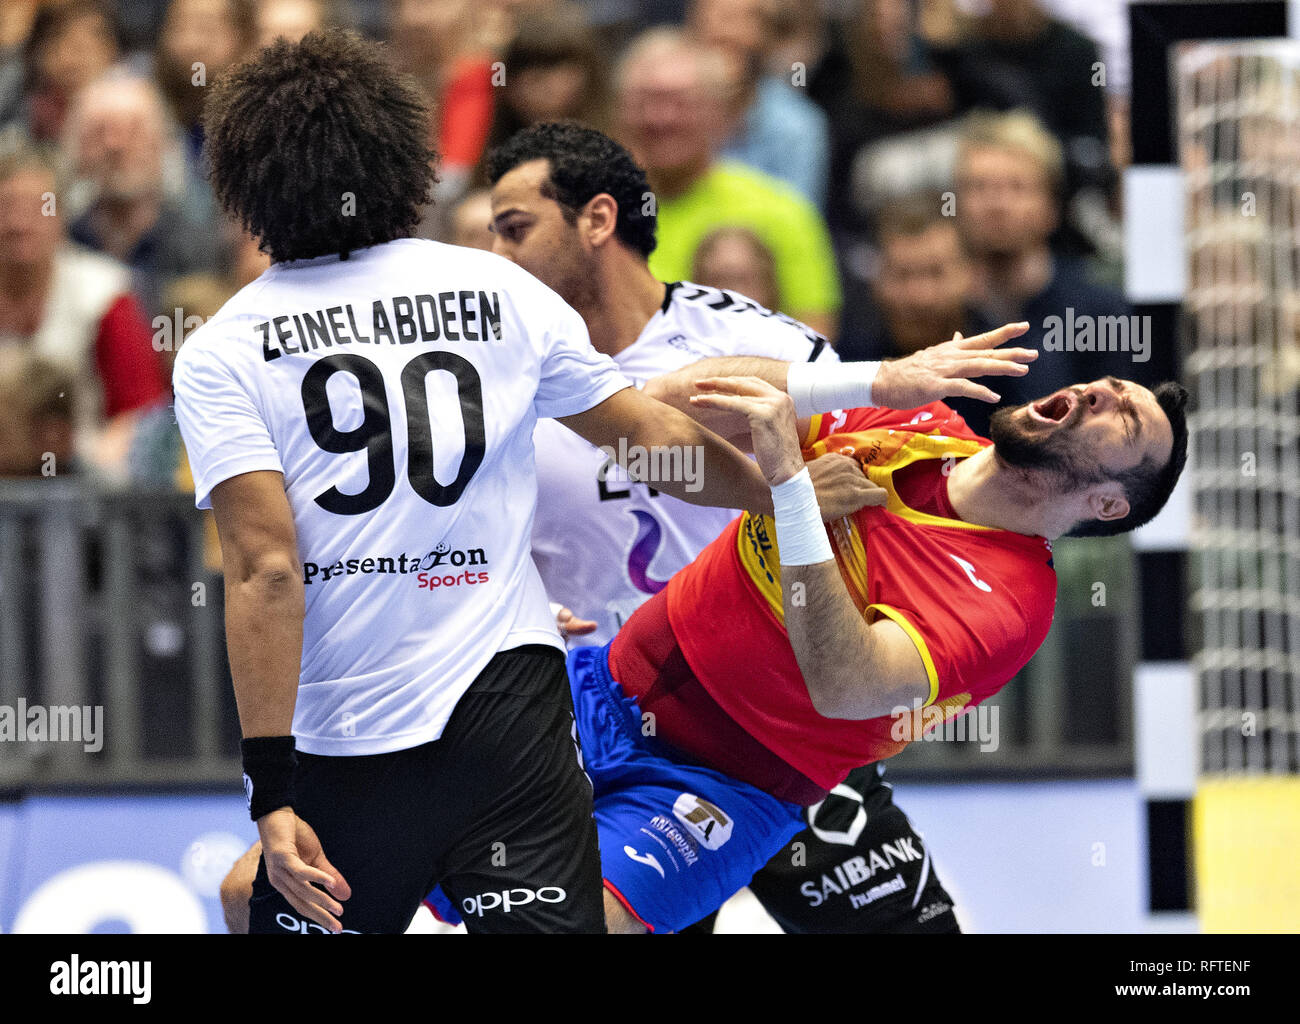 Herning, Denmark. 26th Jan, 2019. Gedeon Guardiola Vilaplana (30), Spain is blocked by Ali Zeinelabedin, Egypt and Ibrahim Elmasry, Egypt in the handball match for the 7th and 8th place between Spain and Egypt in Jyske Bank Boxen in Herning during the 2019 IHF Handball World Championship in Germany/Denmark. Credit: Lars Moeller/ZUMA Wire/Alamy Live News Credit: ZUMA Press, Inc./Alamy Live News Stock Photo